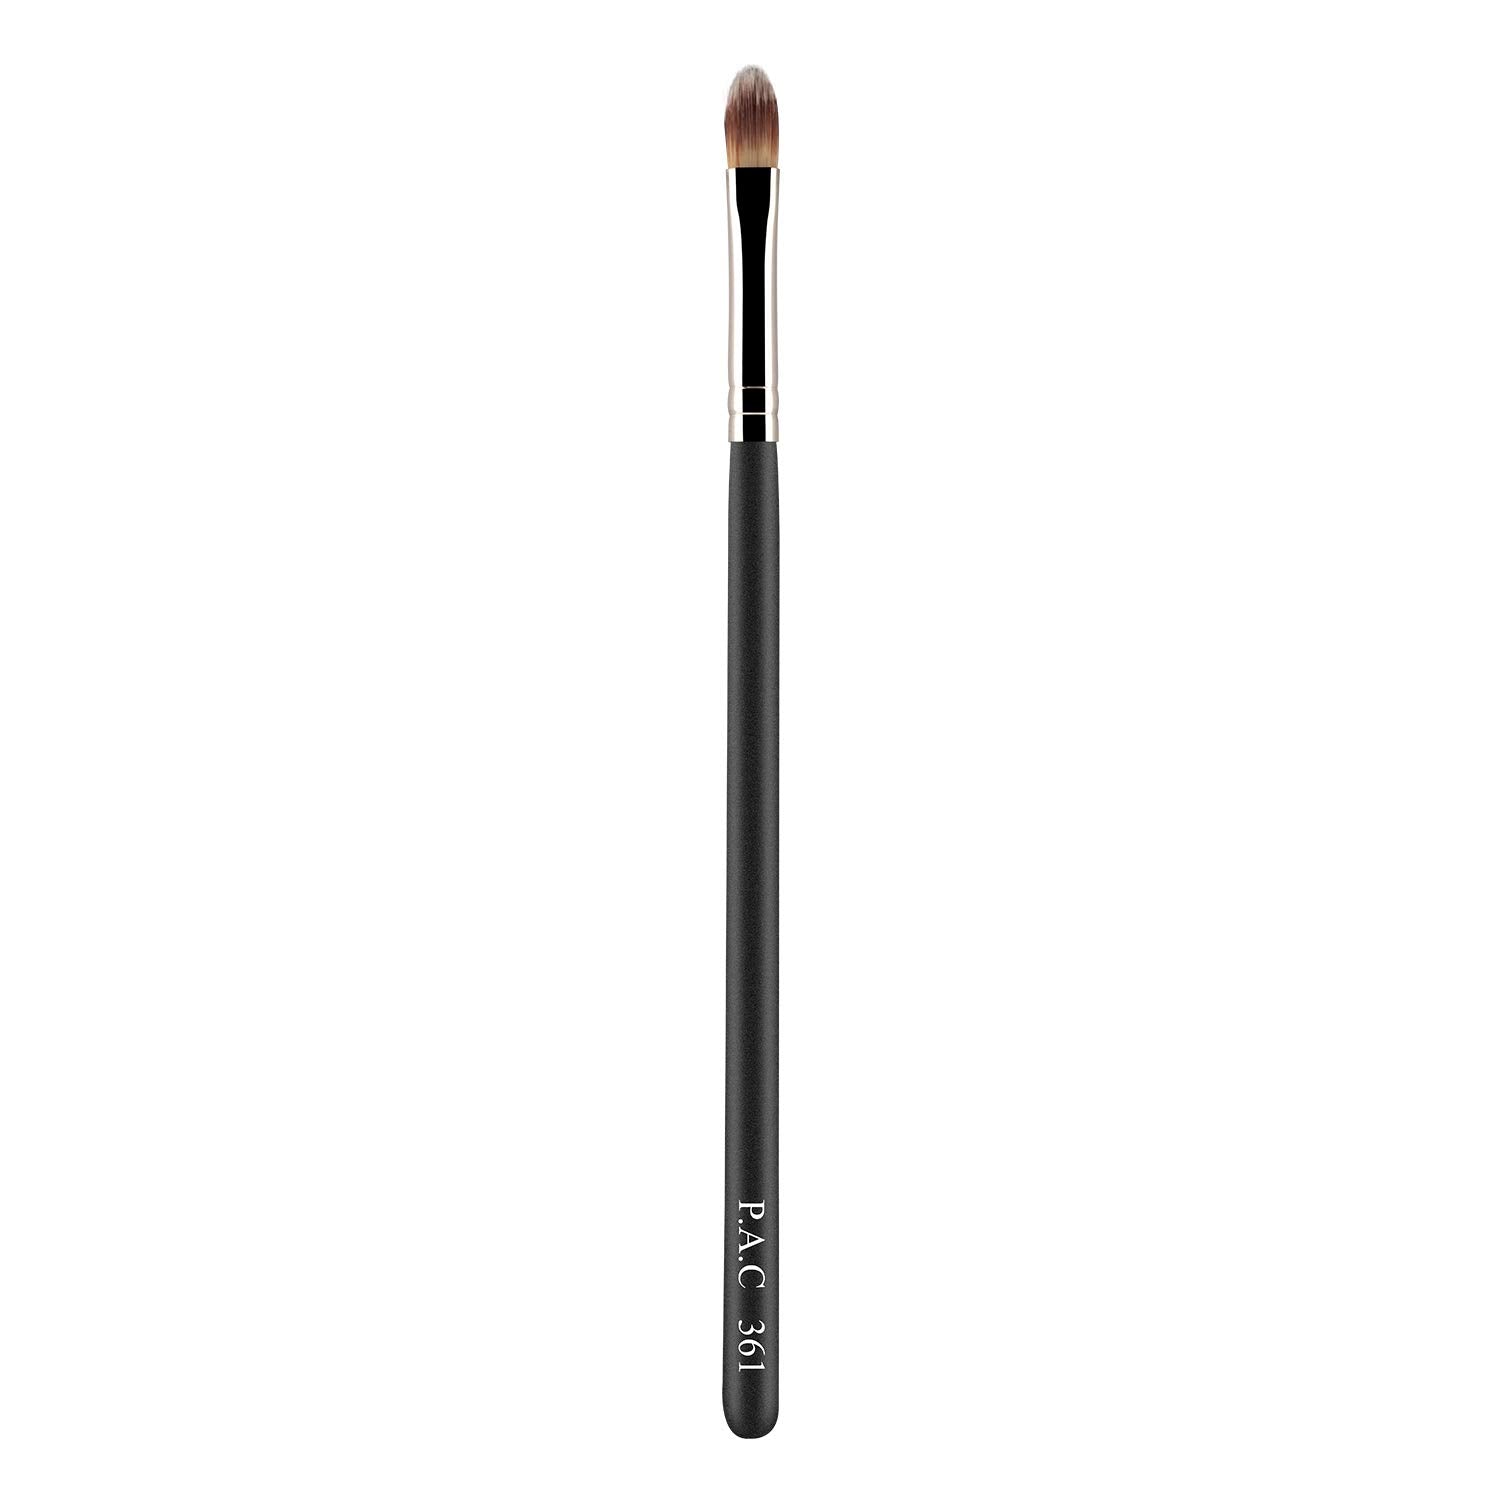 PAC Concealer Brush 361 PAC